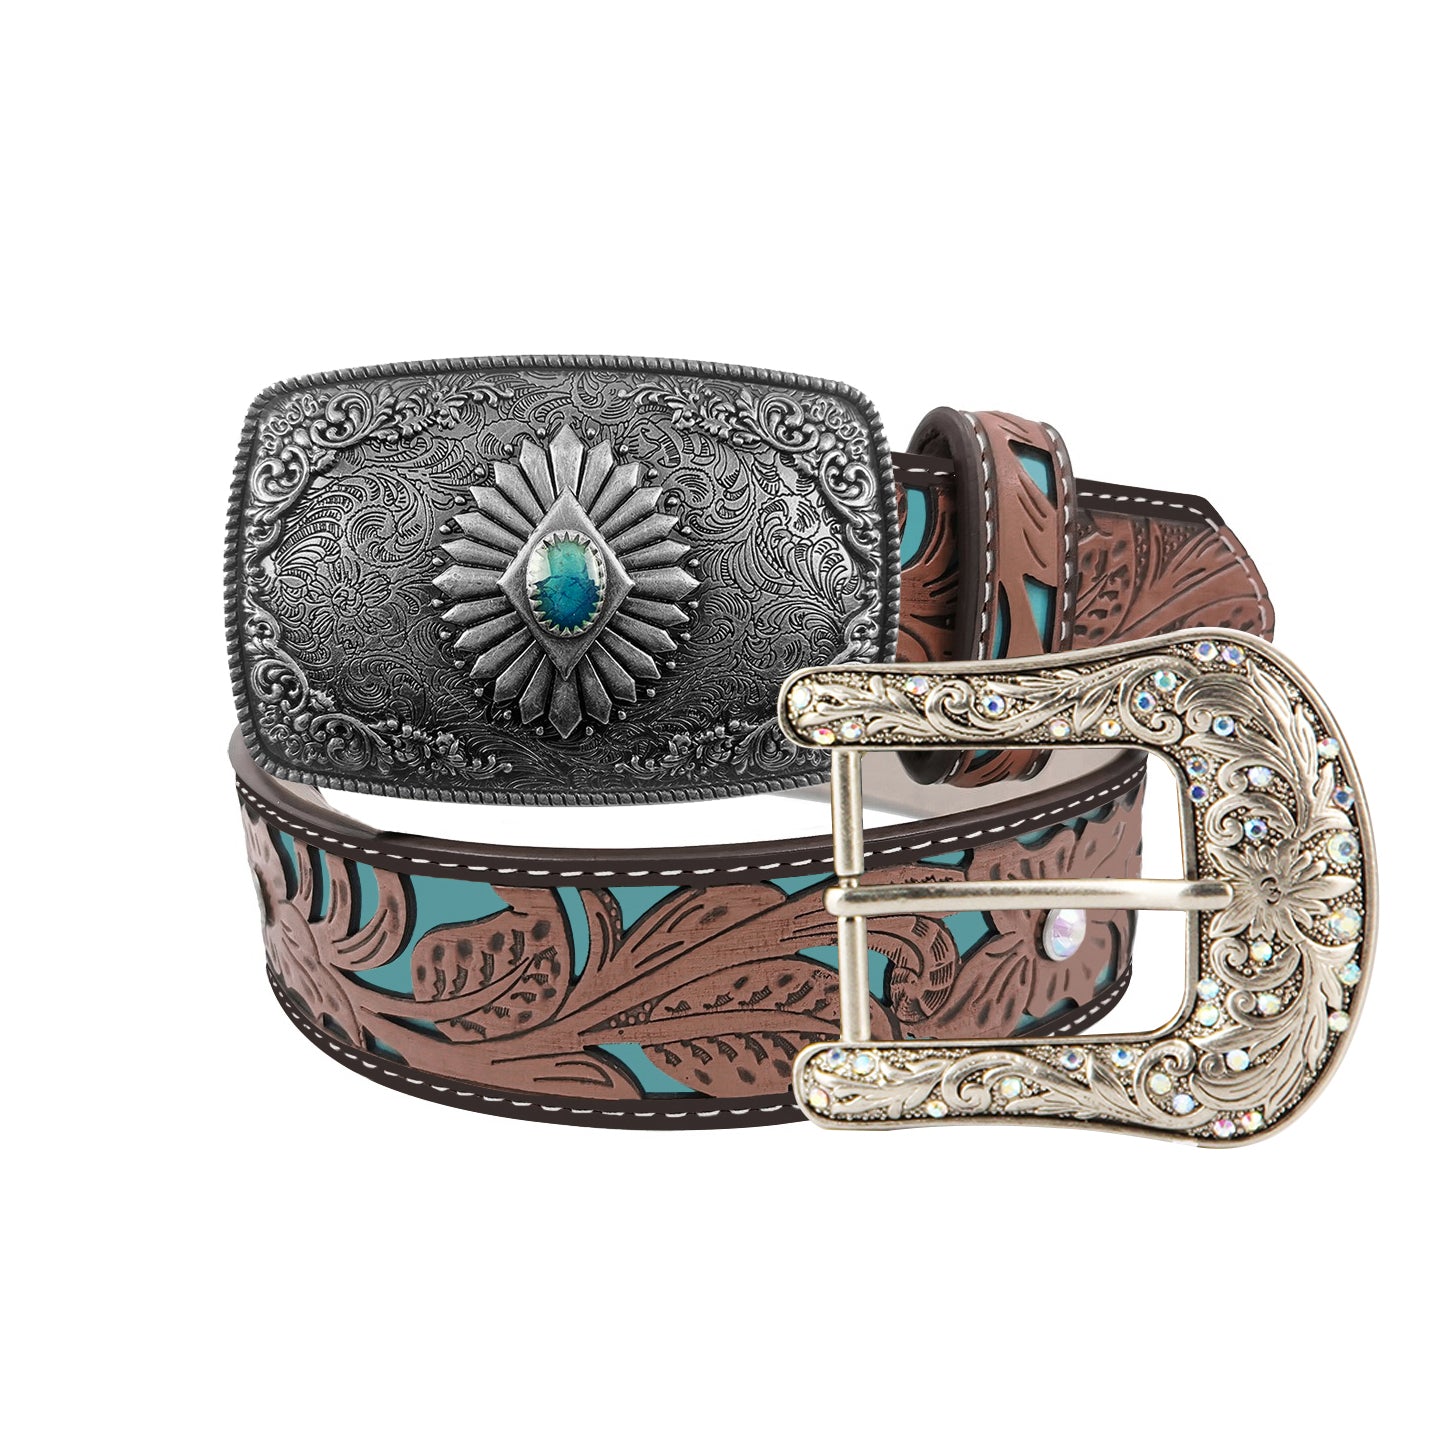 TOPACC Western Turquoise Belts - Square Turquoise Belt Buckle Cobre/Bronce